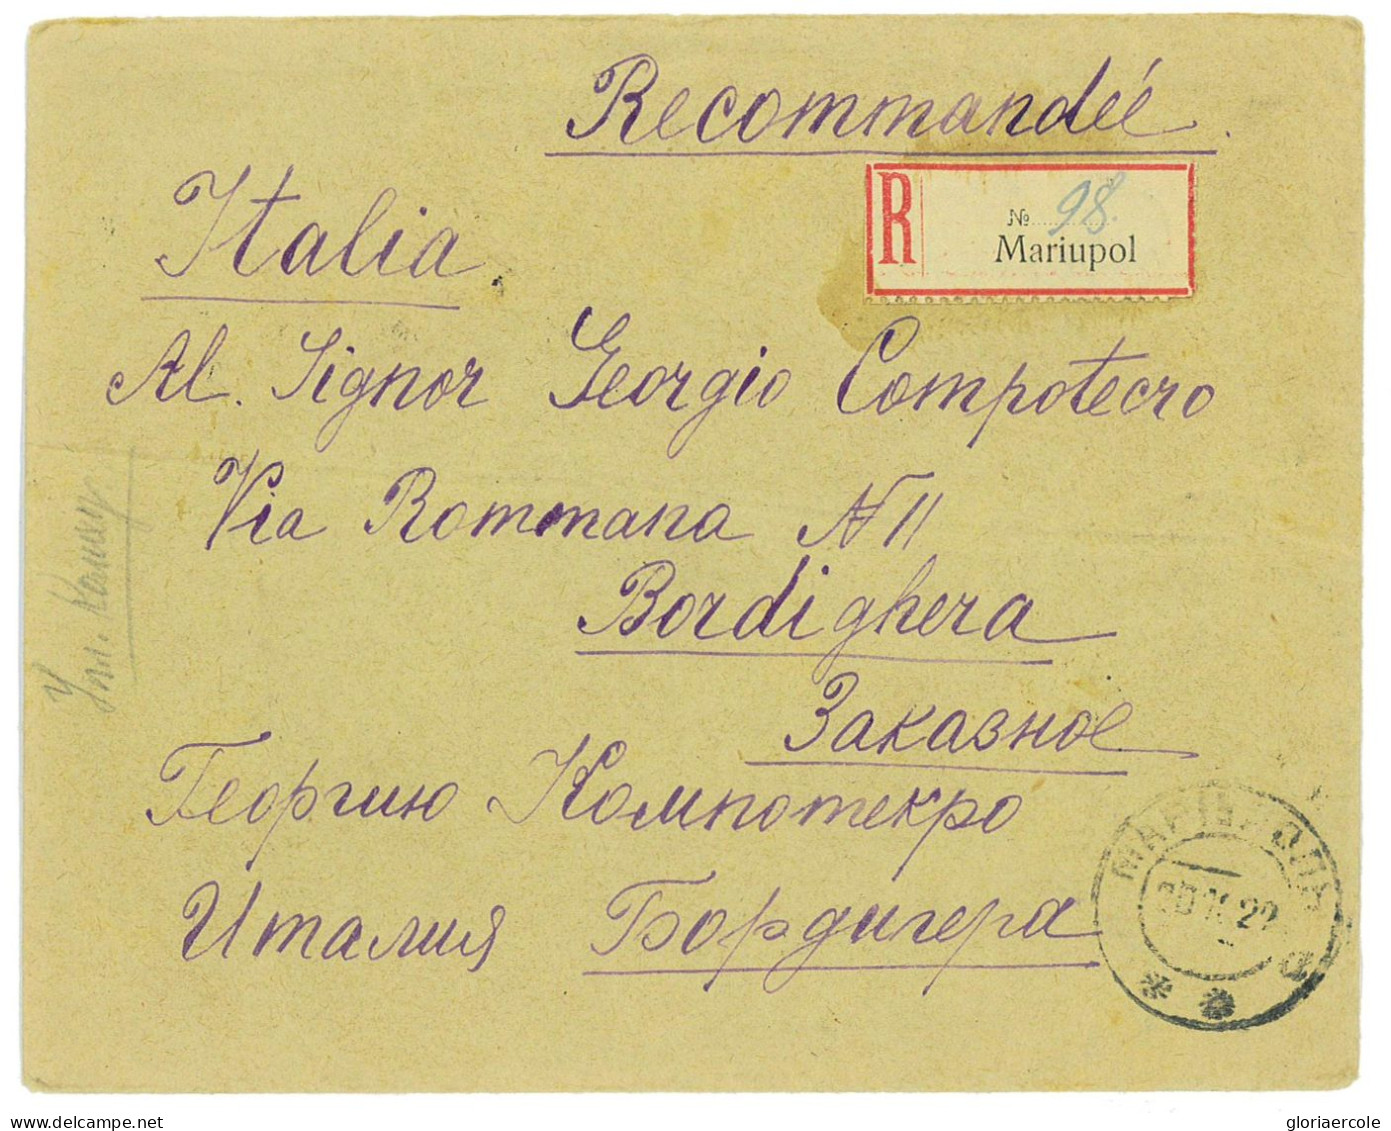 P2923 - RUSSIA, LETTER TO ITALY, FRANKED WITH 18 STAMP BLOCK OF 5 KOPED 20.10.1922 FROM MARIUPOL REGISTRED - Covers & Documents